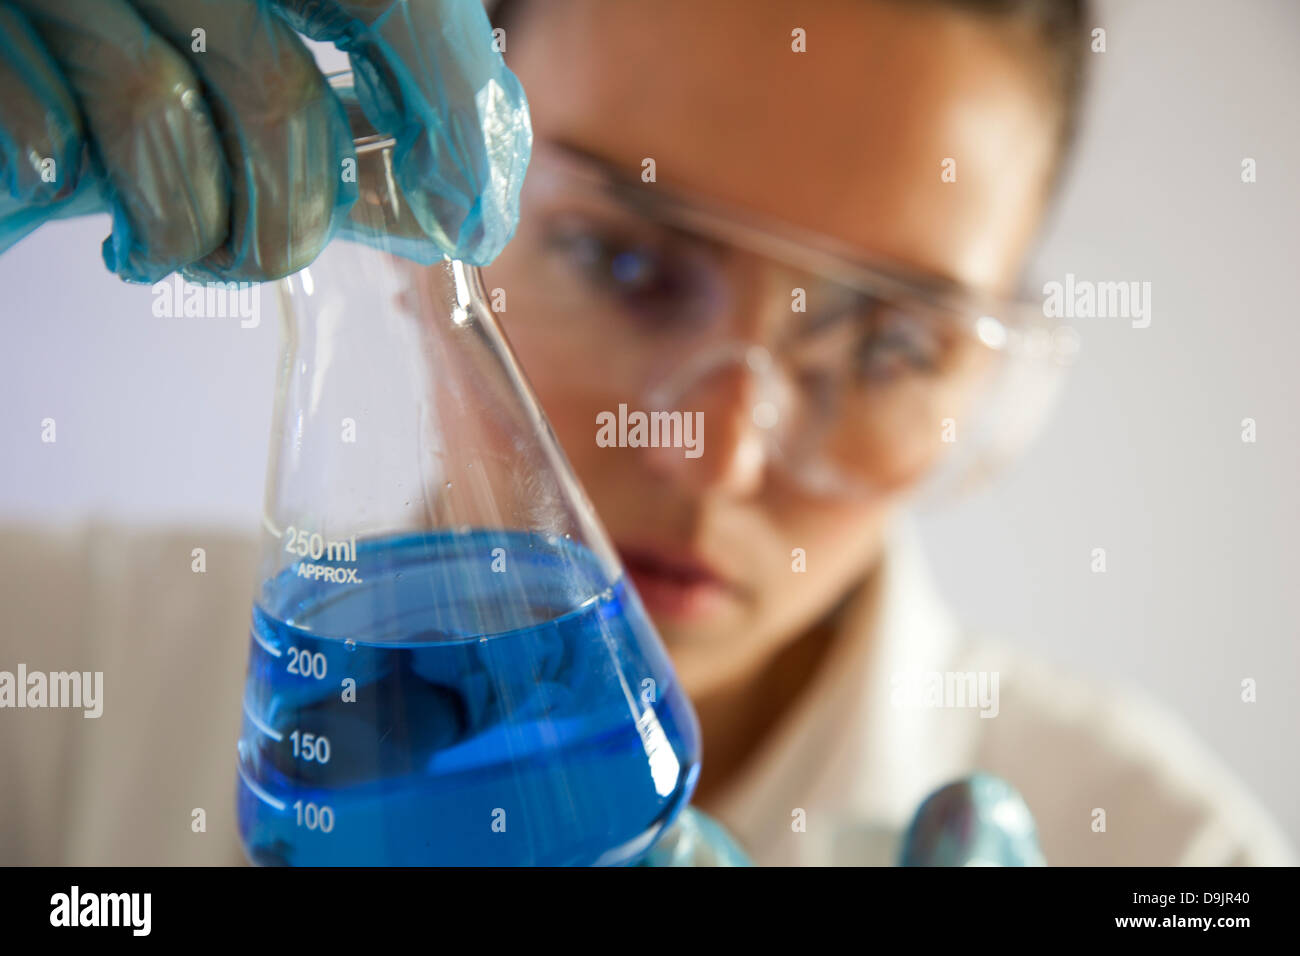 Female lab technician or scientist holding a glass beaker with blue liquid. Stock Photo